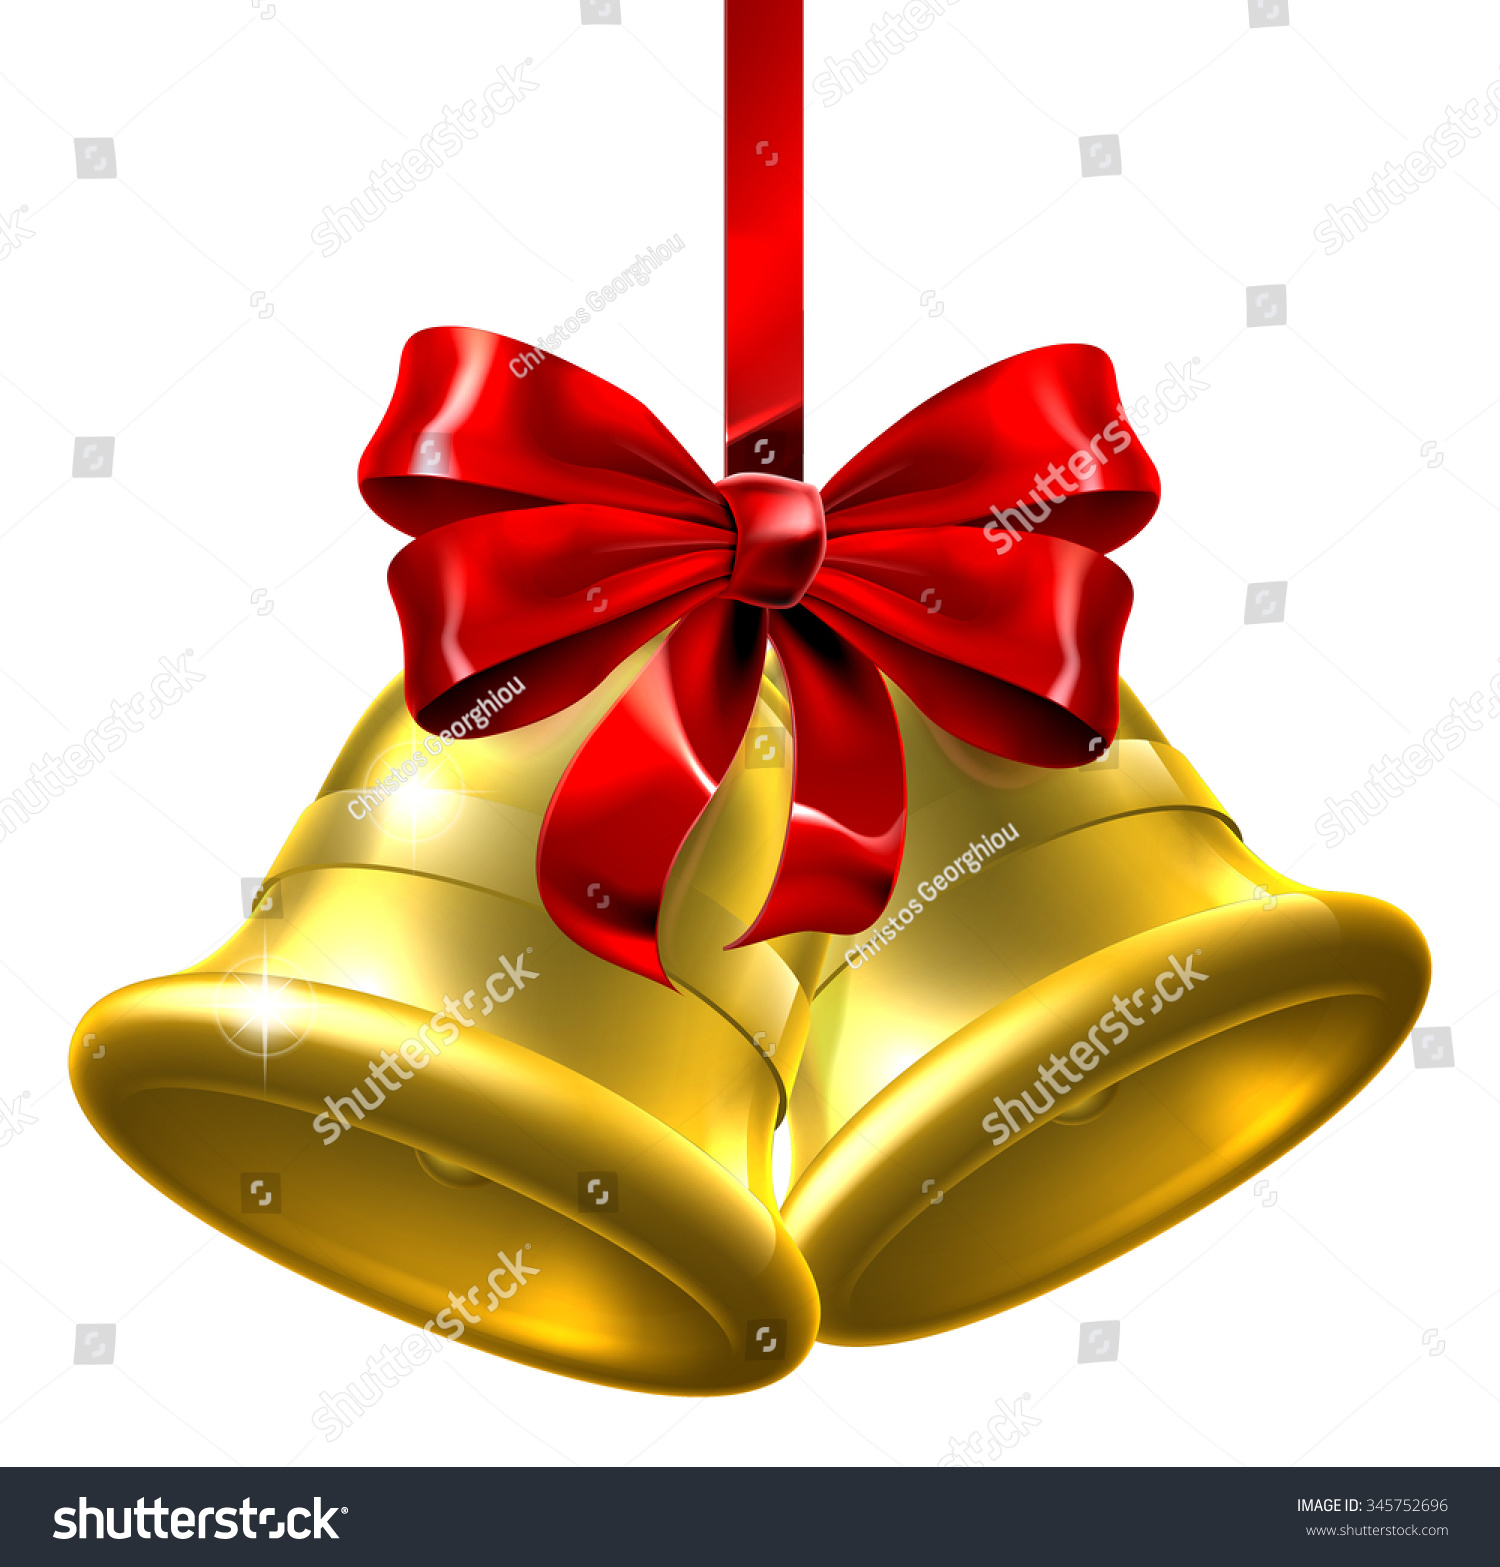 Illustration Pair Gold Christmas Bells Wiith Stock Vector 345752696 ...